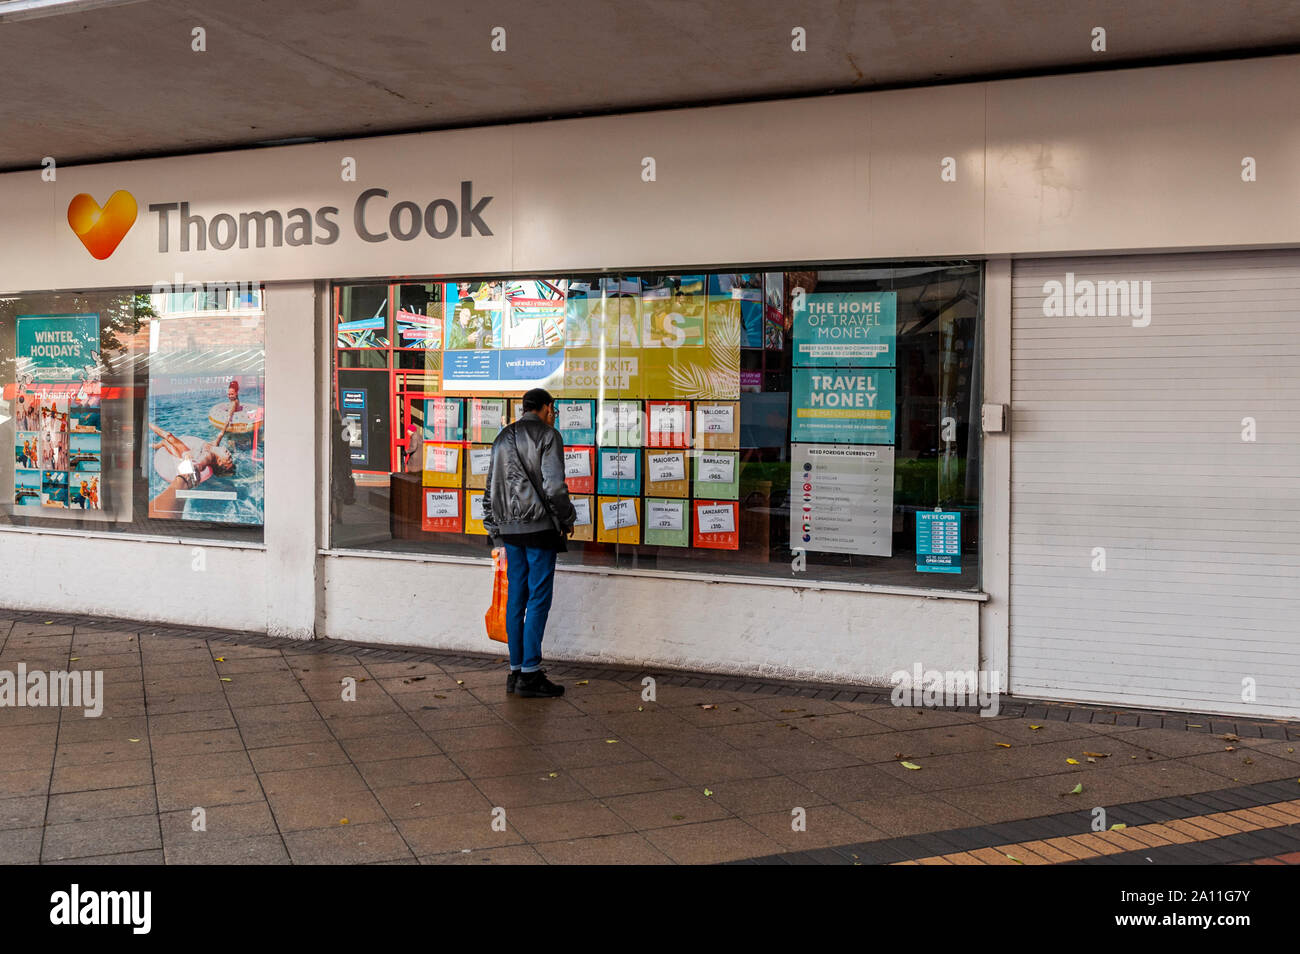 Coventry, UK. 23rd Sept, 2019. The shutters remain down at Thomas Cook travel agent amidst news of its collapse. The collapse means 9,000 UK Thomas Cook jobs will be lost. Credit: Andy Gibson/Alamy Live News. Stock Photo